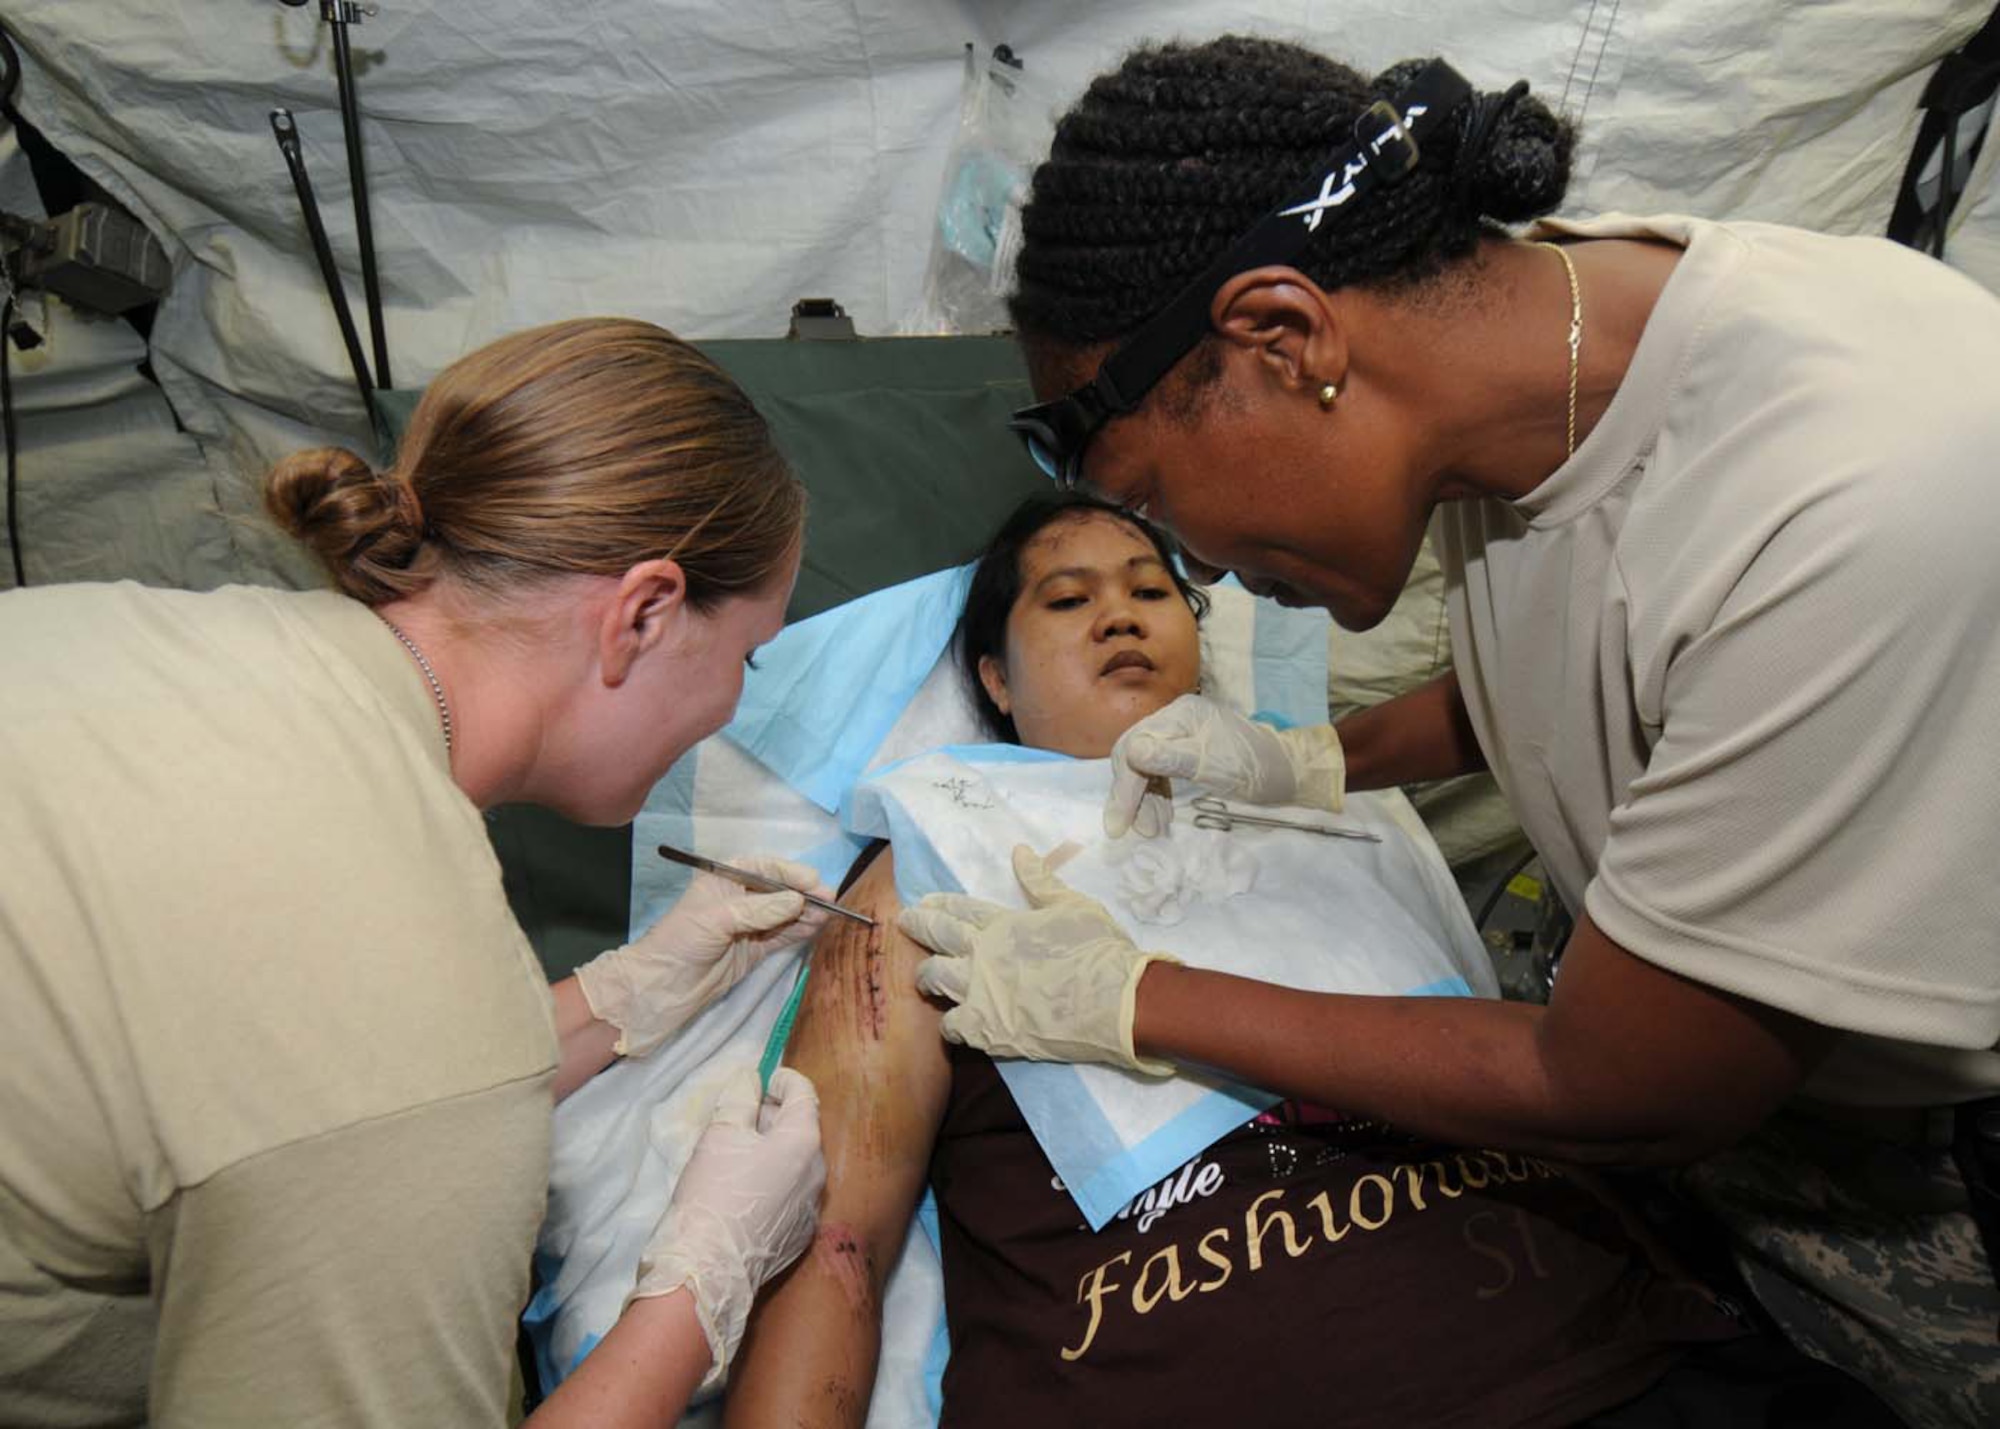 Staff Sgt. Beth Sherman (left) and Maj. Brenda Parker remove sutures in a mobile field hospital in Padang, Indonesia, Oct. 8. Sergeant Sherman, an individual duty medical technician, and Major Parker, a nurse, are deployed from the 36th Medical Group at Andersen Air Force Base, Guam, as part of an Air Force humanitarian assistance rapid response team. (U.S. Air Force photo/Staff Sgt. Veronica Pierce)